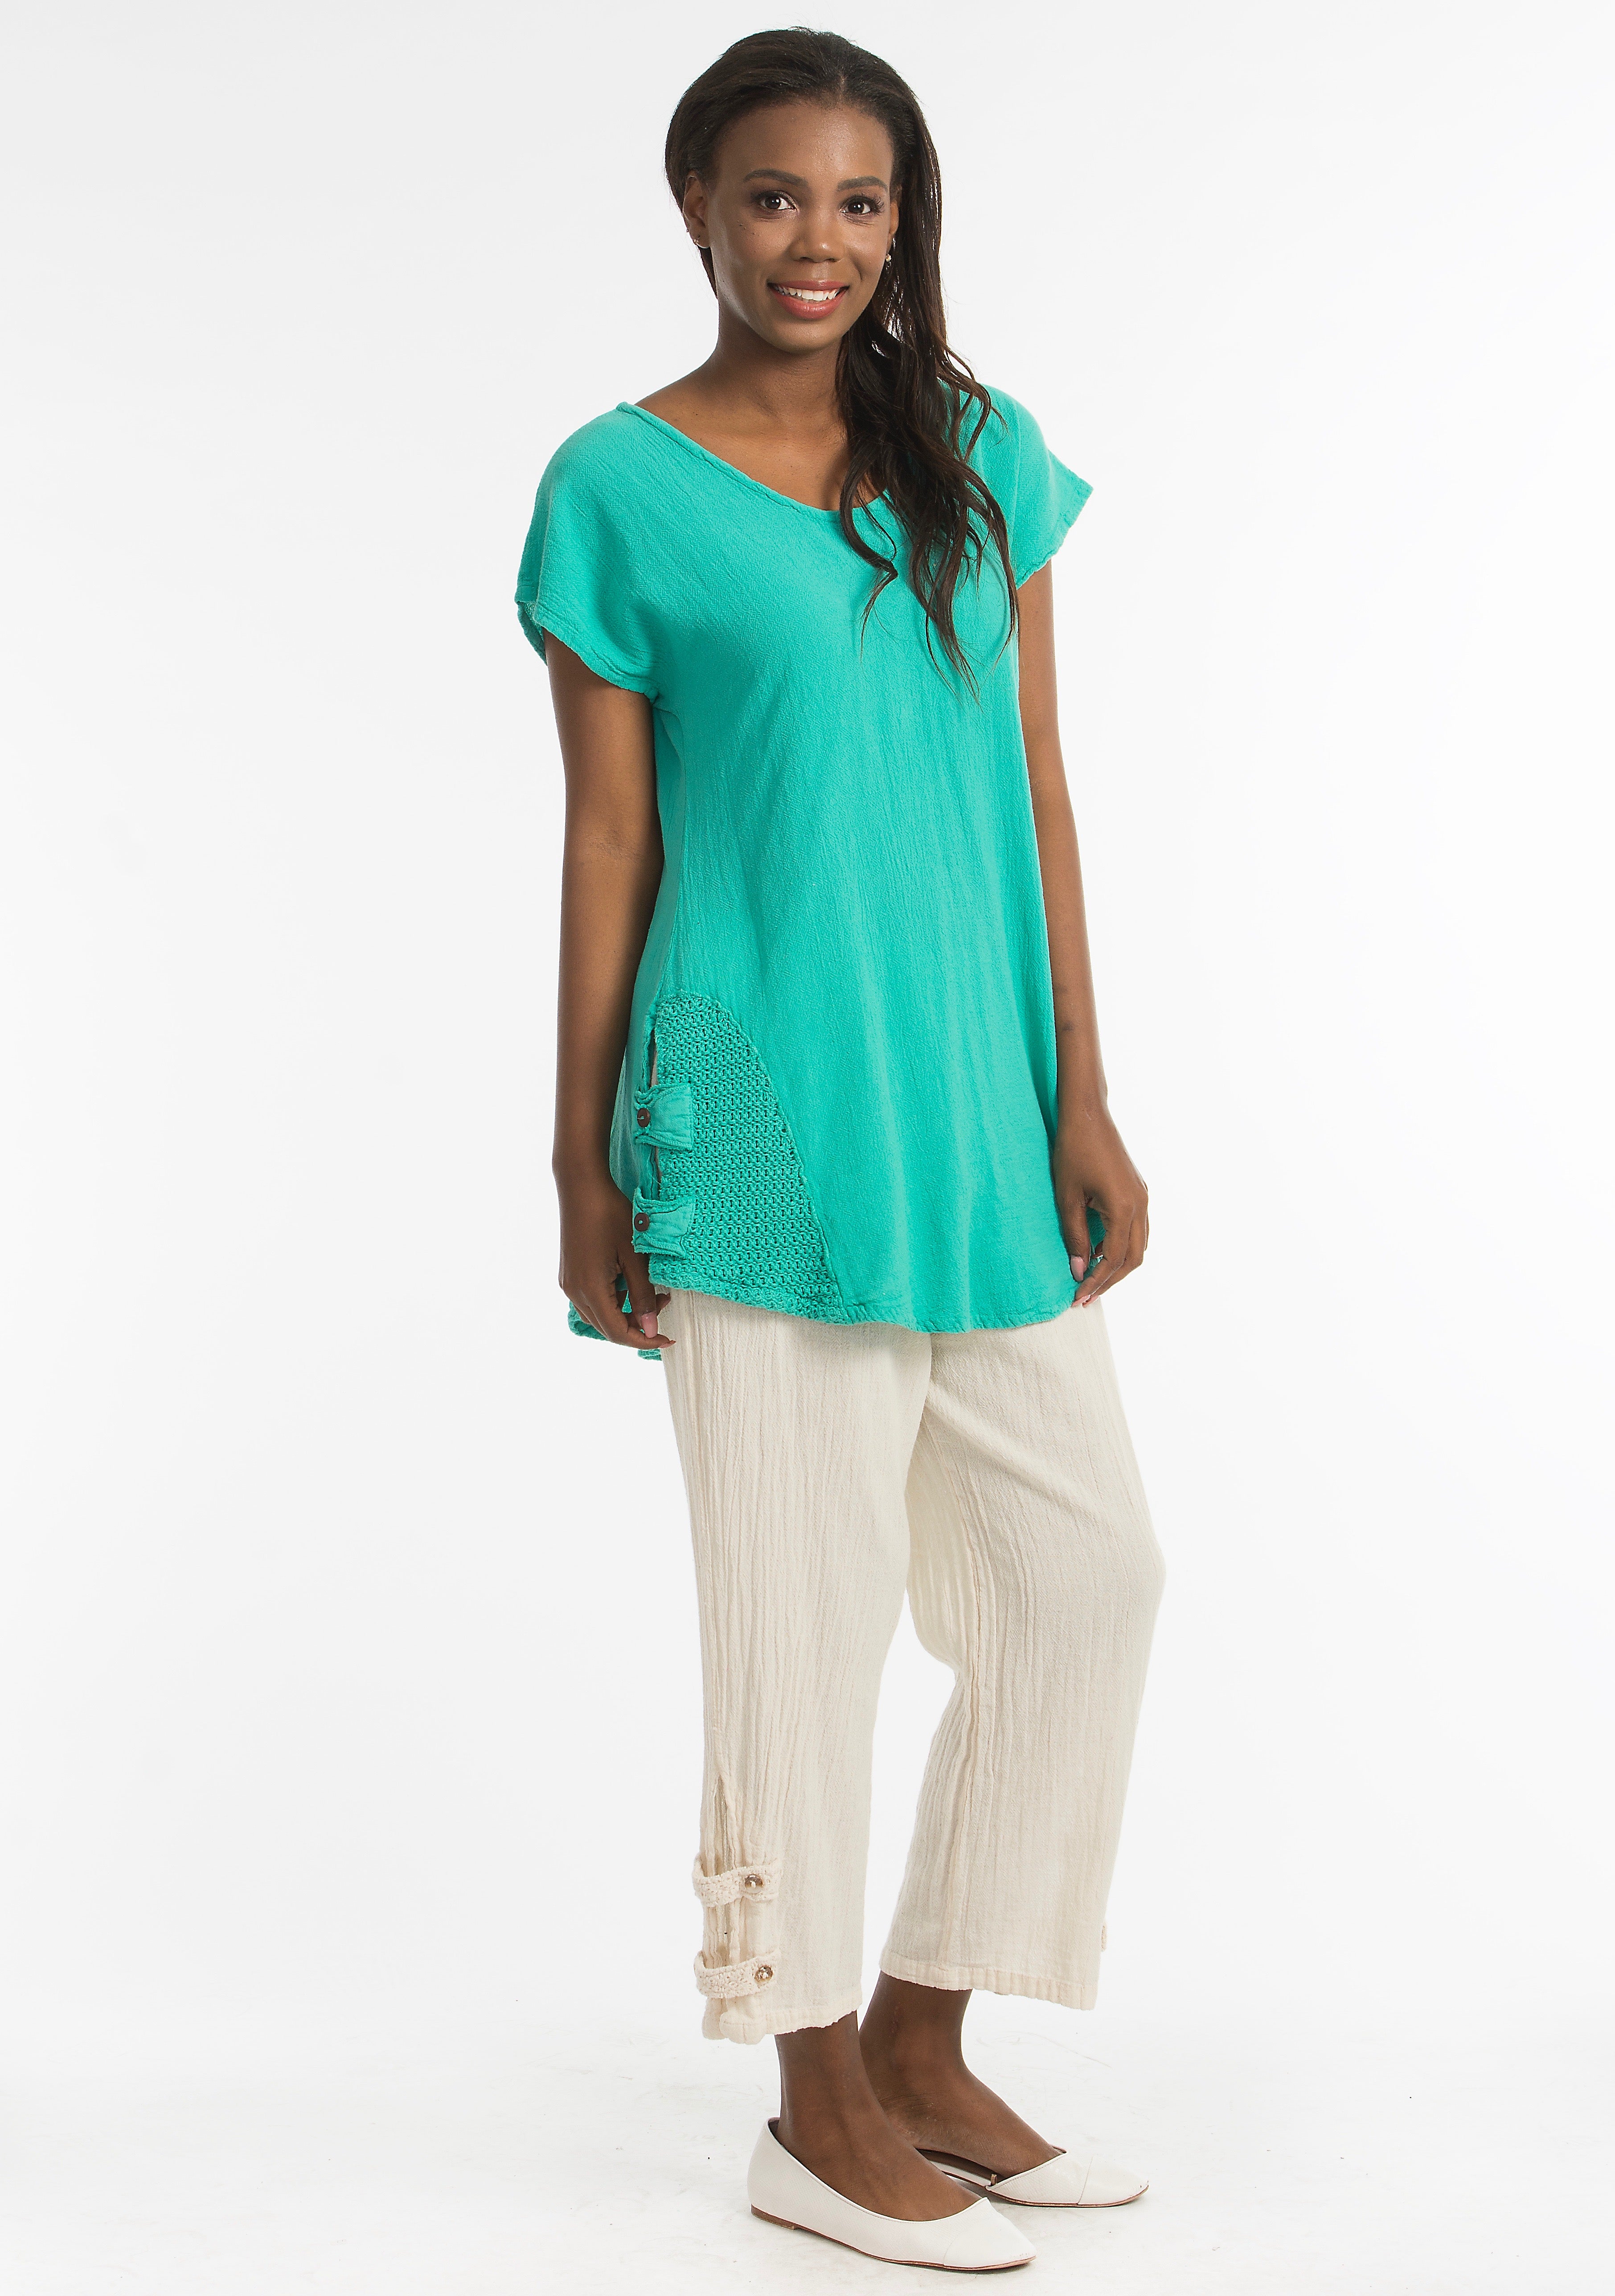 Serena Pant 100% Cotton Gauze Floods with POCKETS!